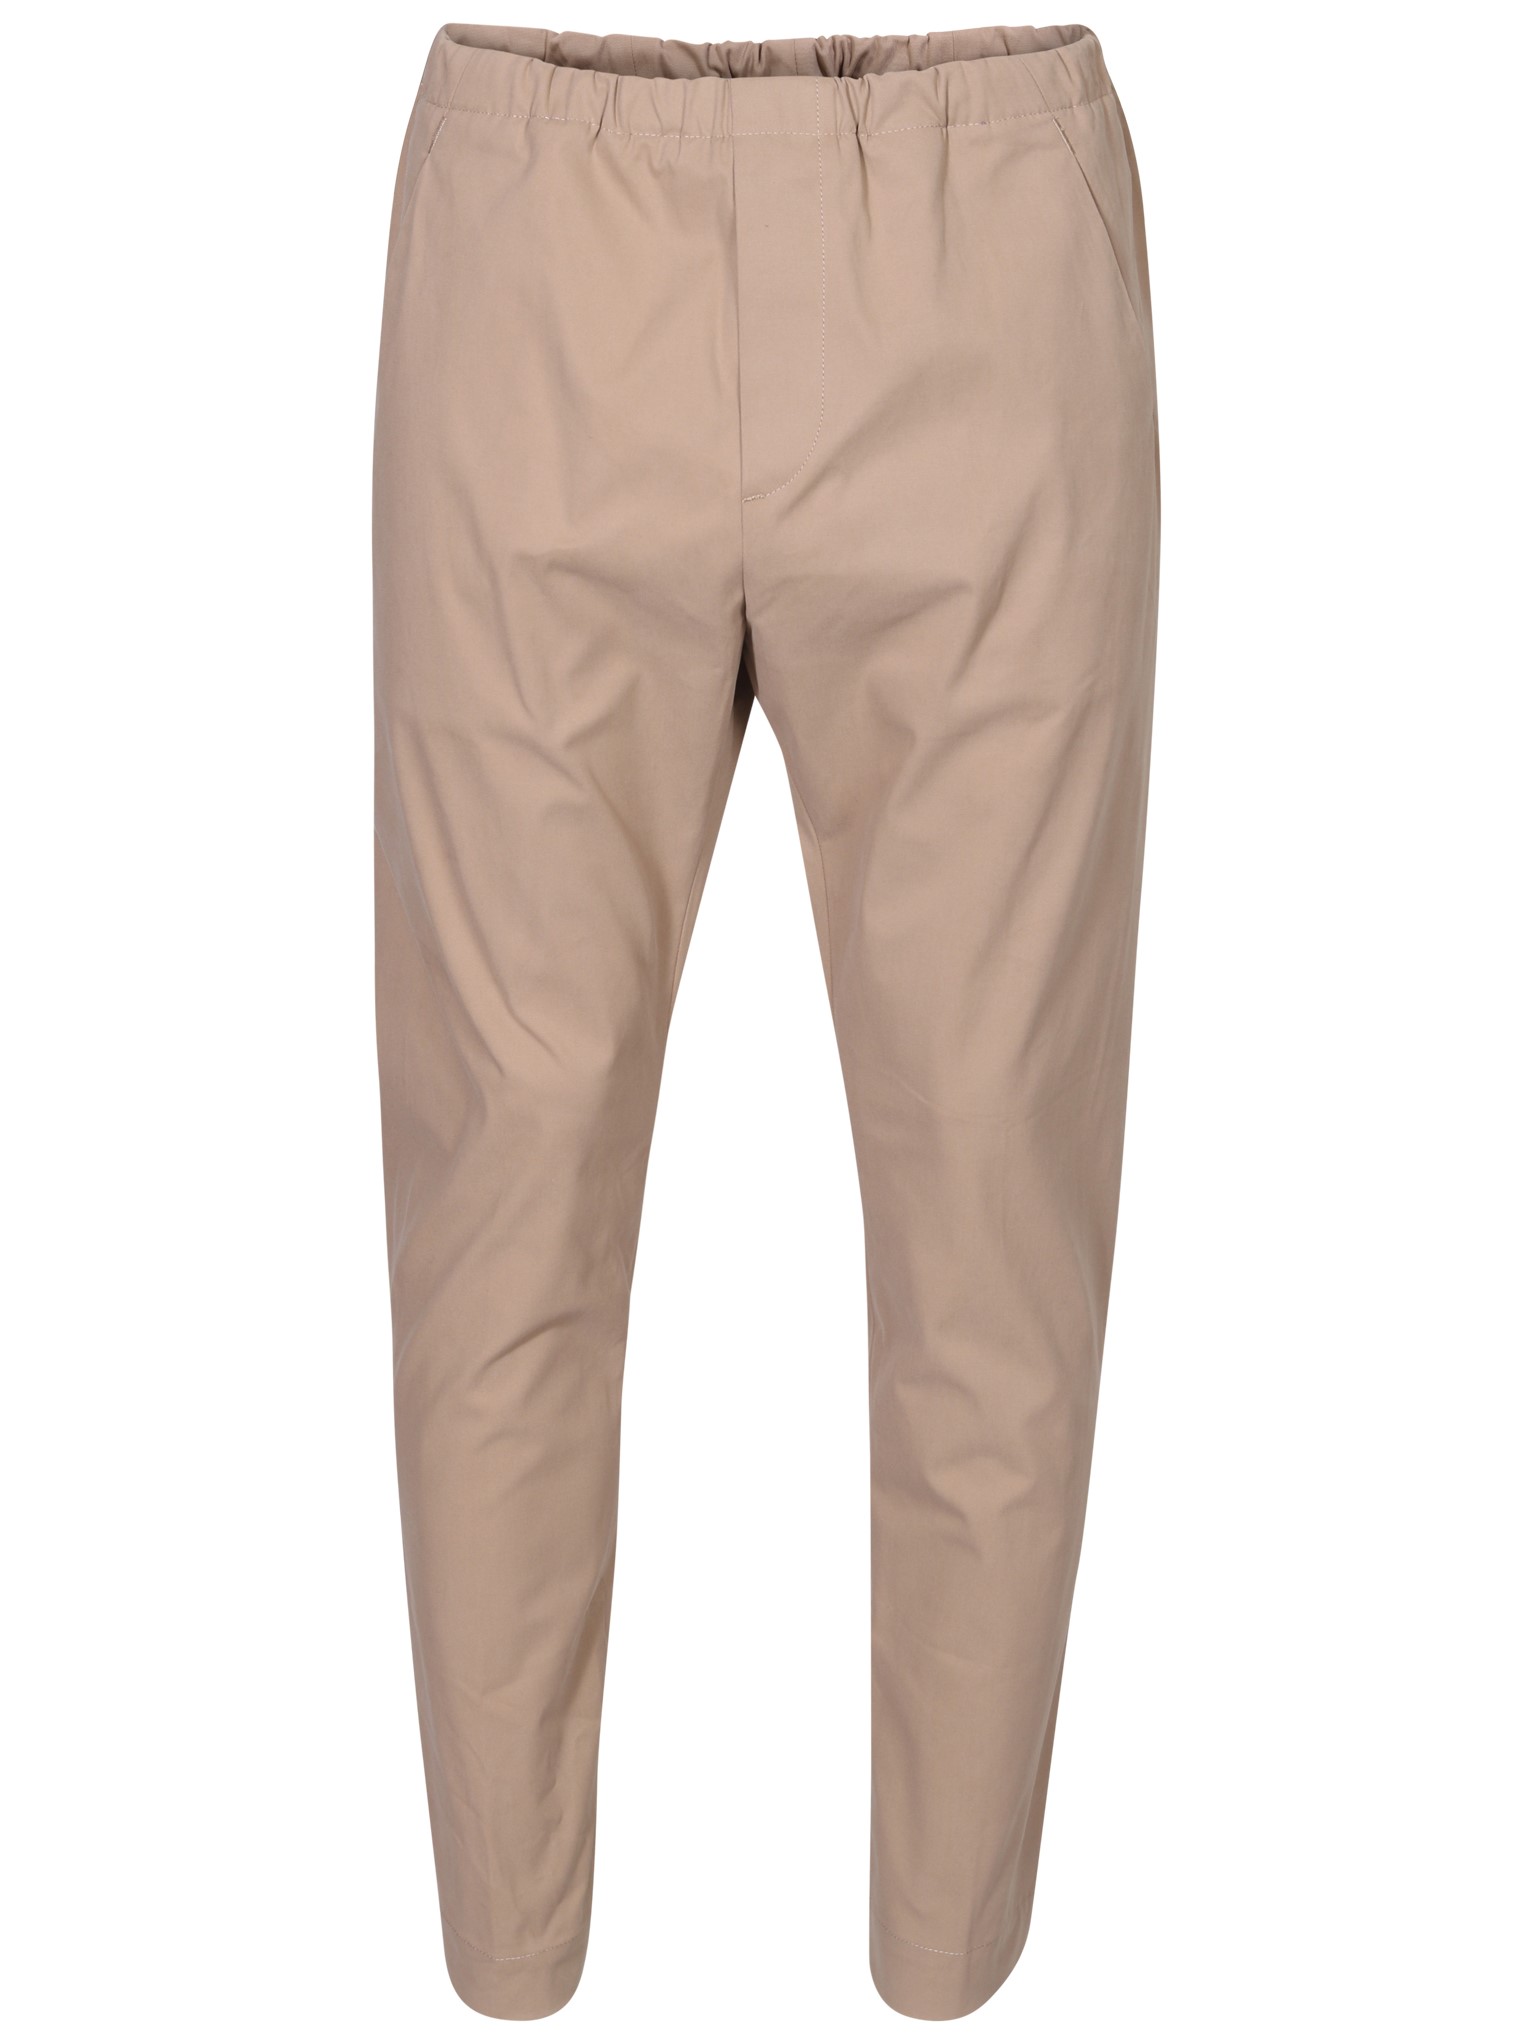 NINE:INTHE:MORNING Mirco Carrot Cotton Stretch Pant in Beige 48